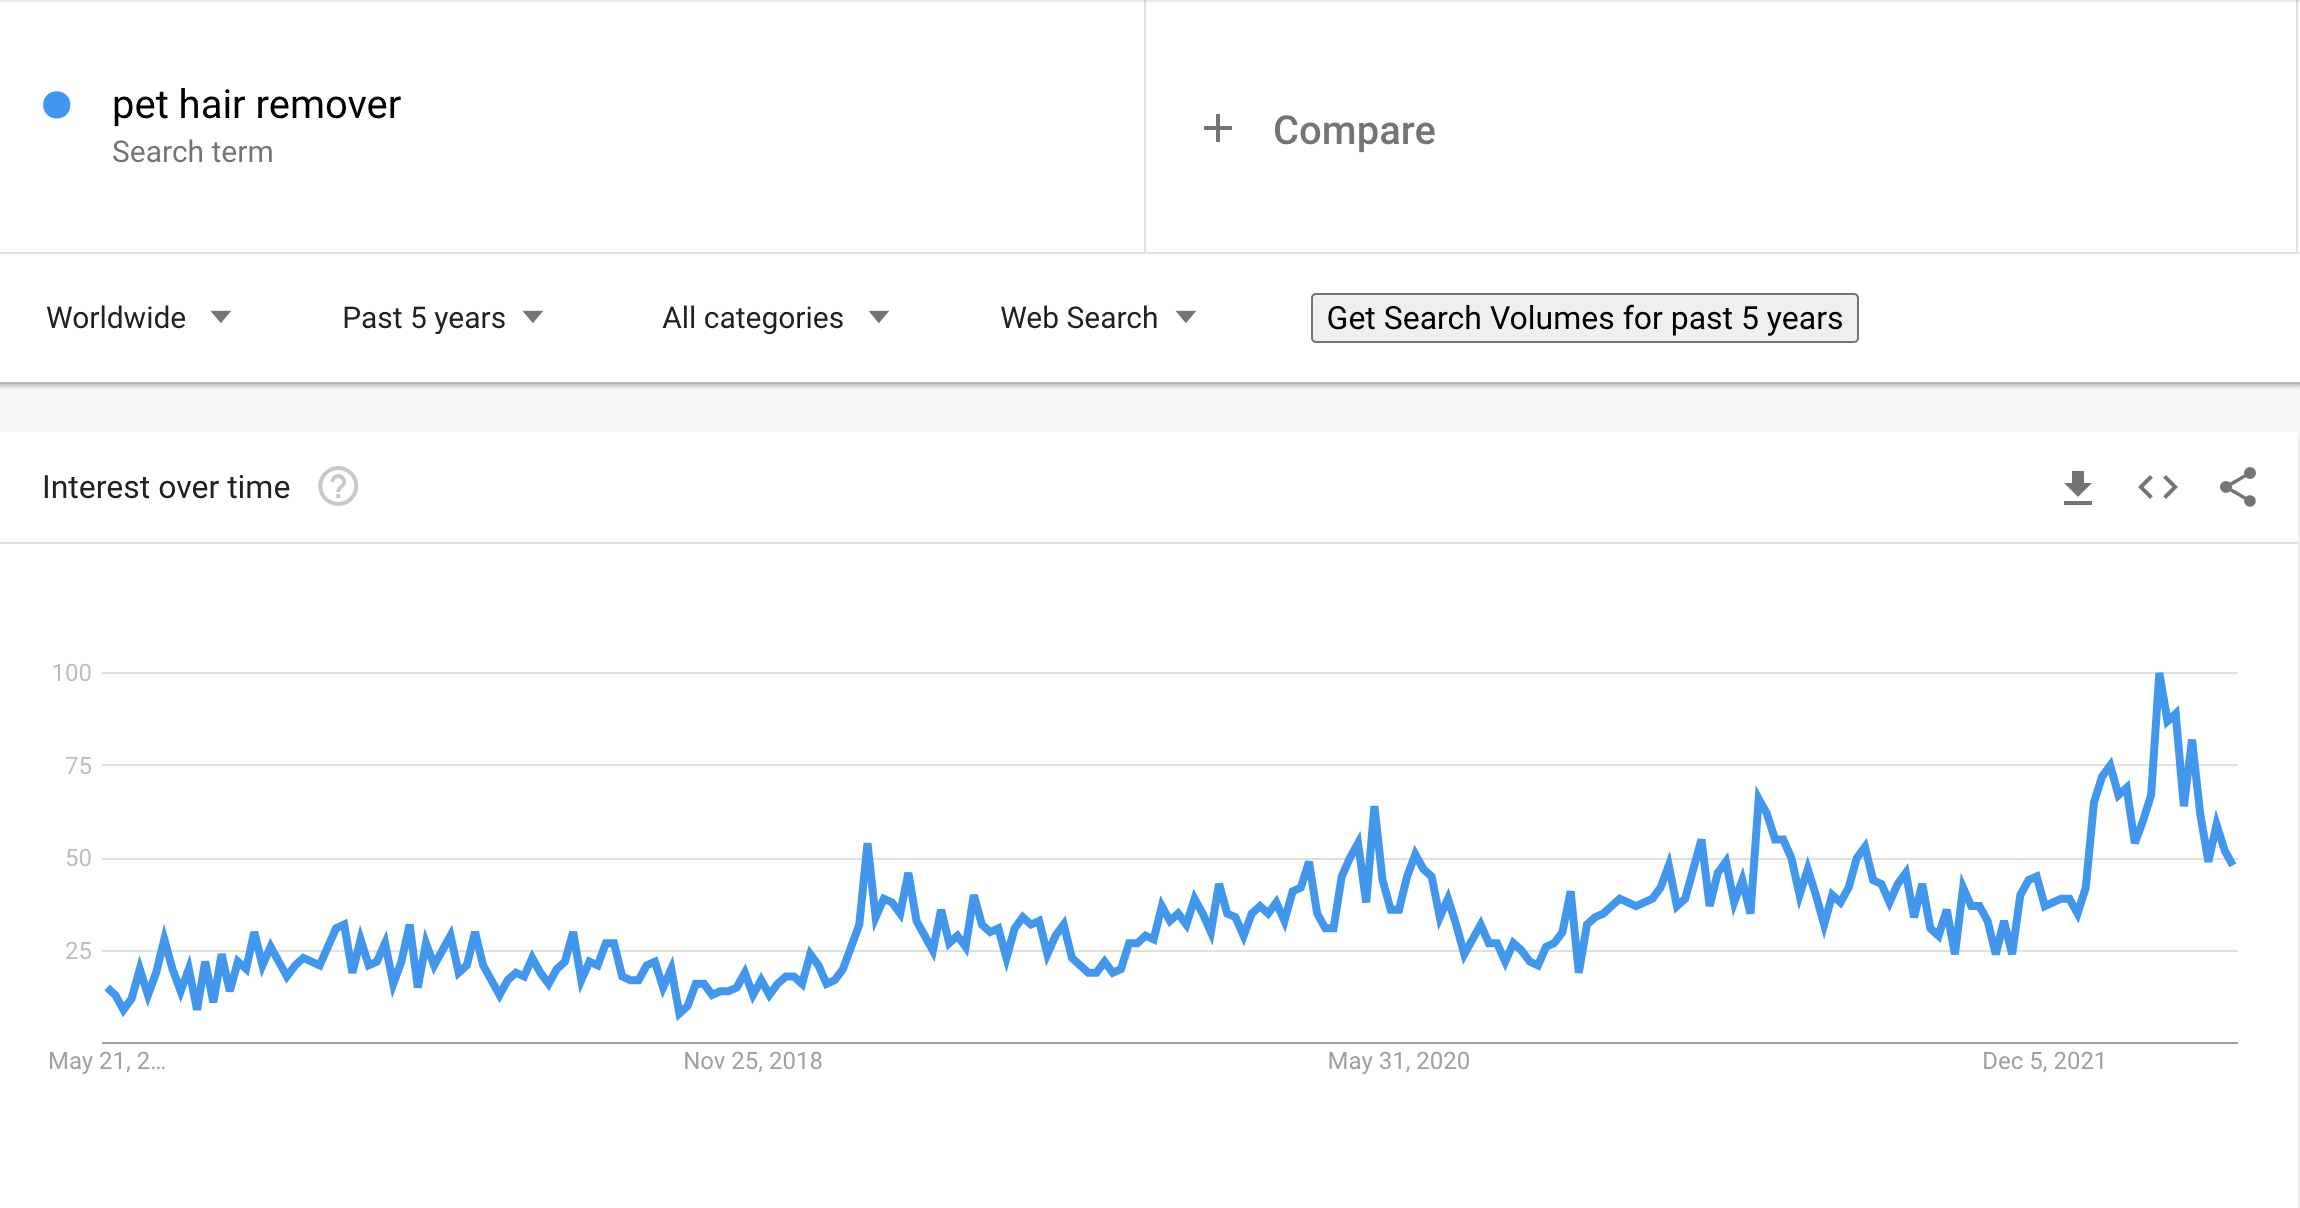 Pet hair remover on Google Trends